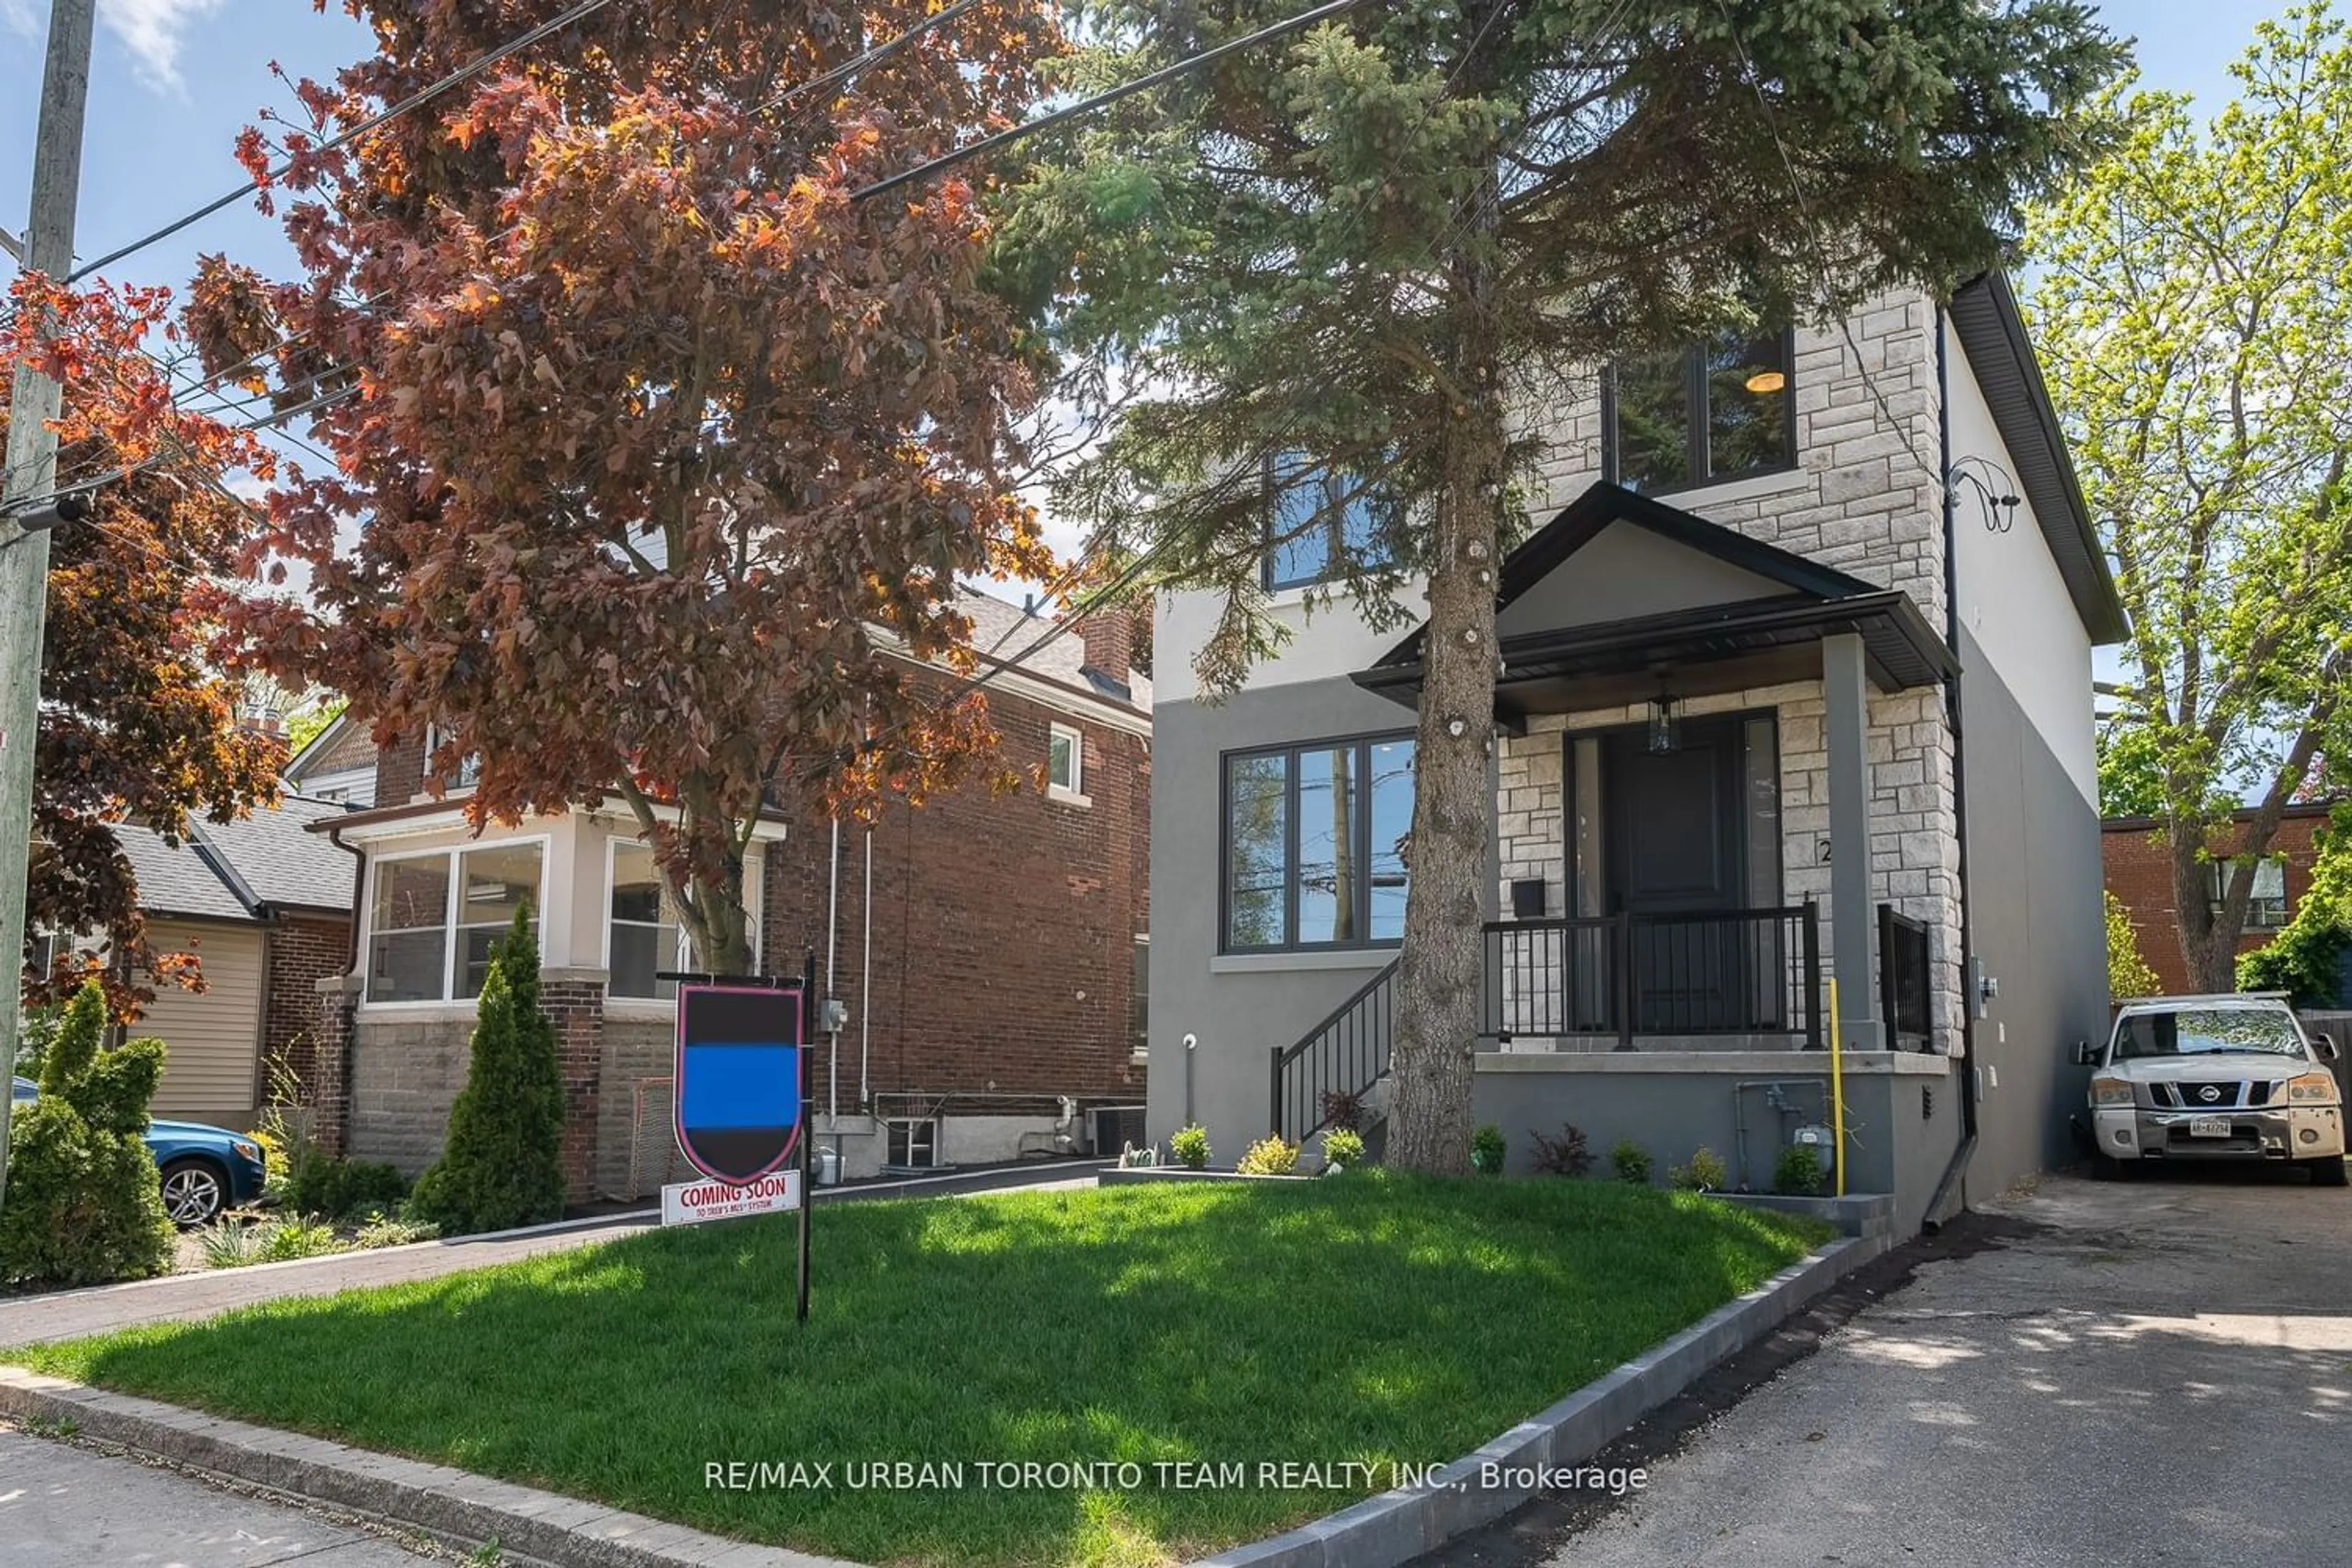 A pic from exterior of the house or condo for 26 Kalmar Ave, Toronto Ontario M1N 3G3